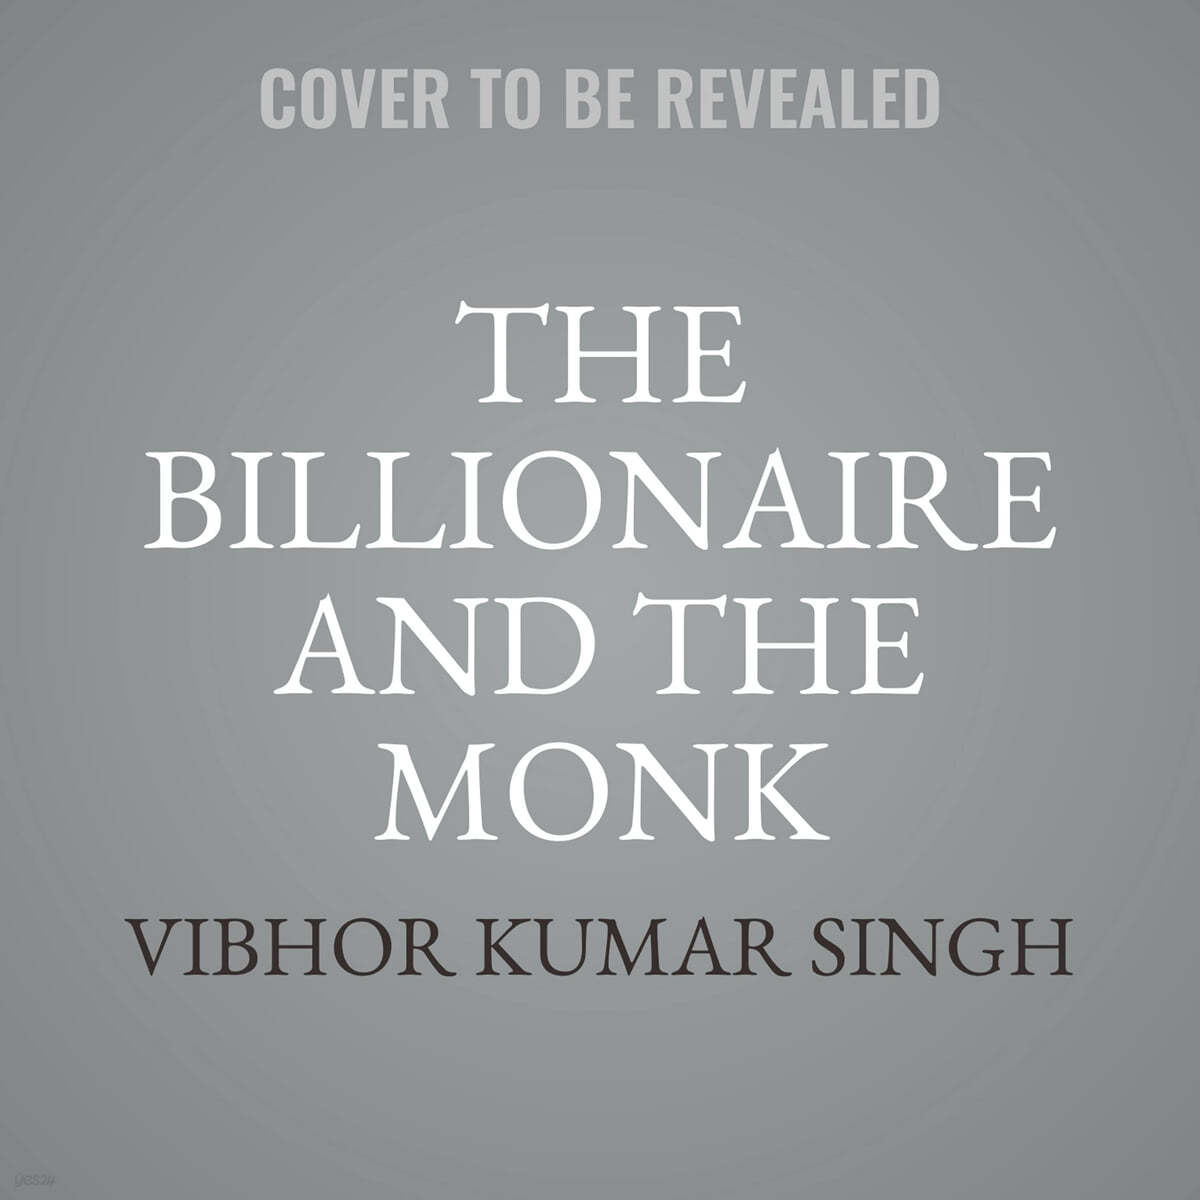 The Billionaire and the Monk: An Inspirational Story about Finding Extraordinary Happiness